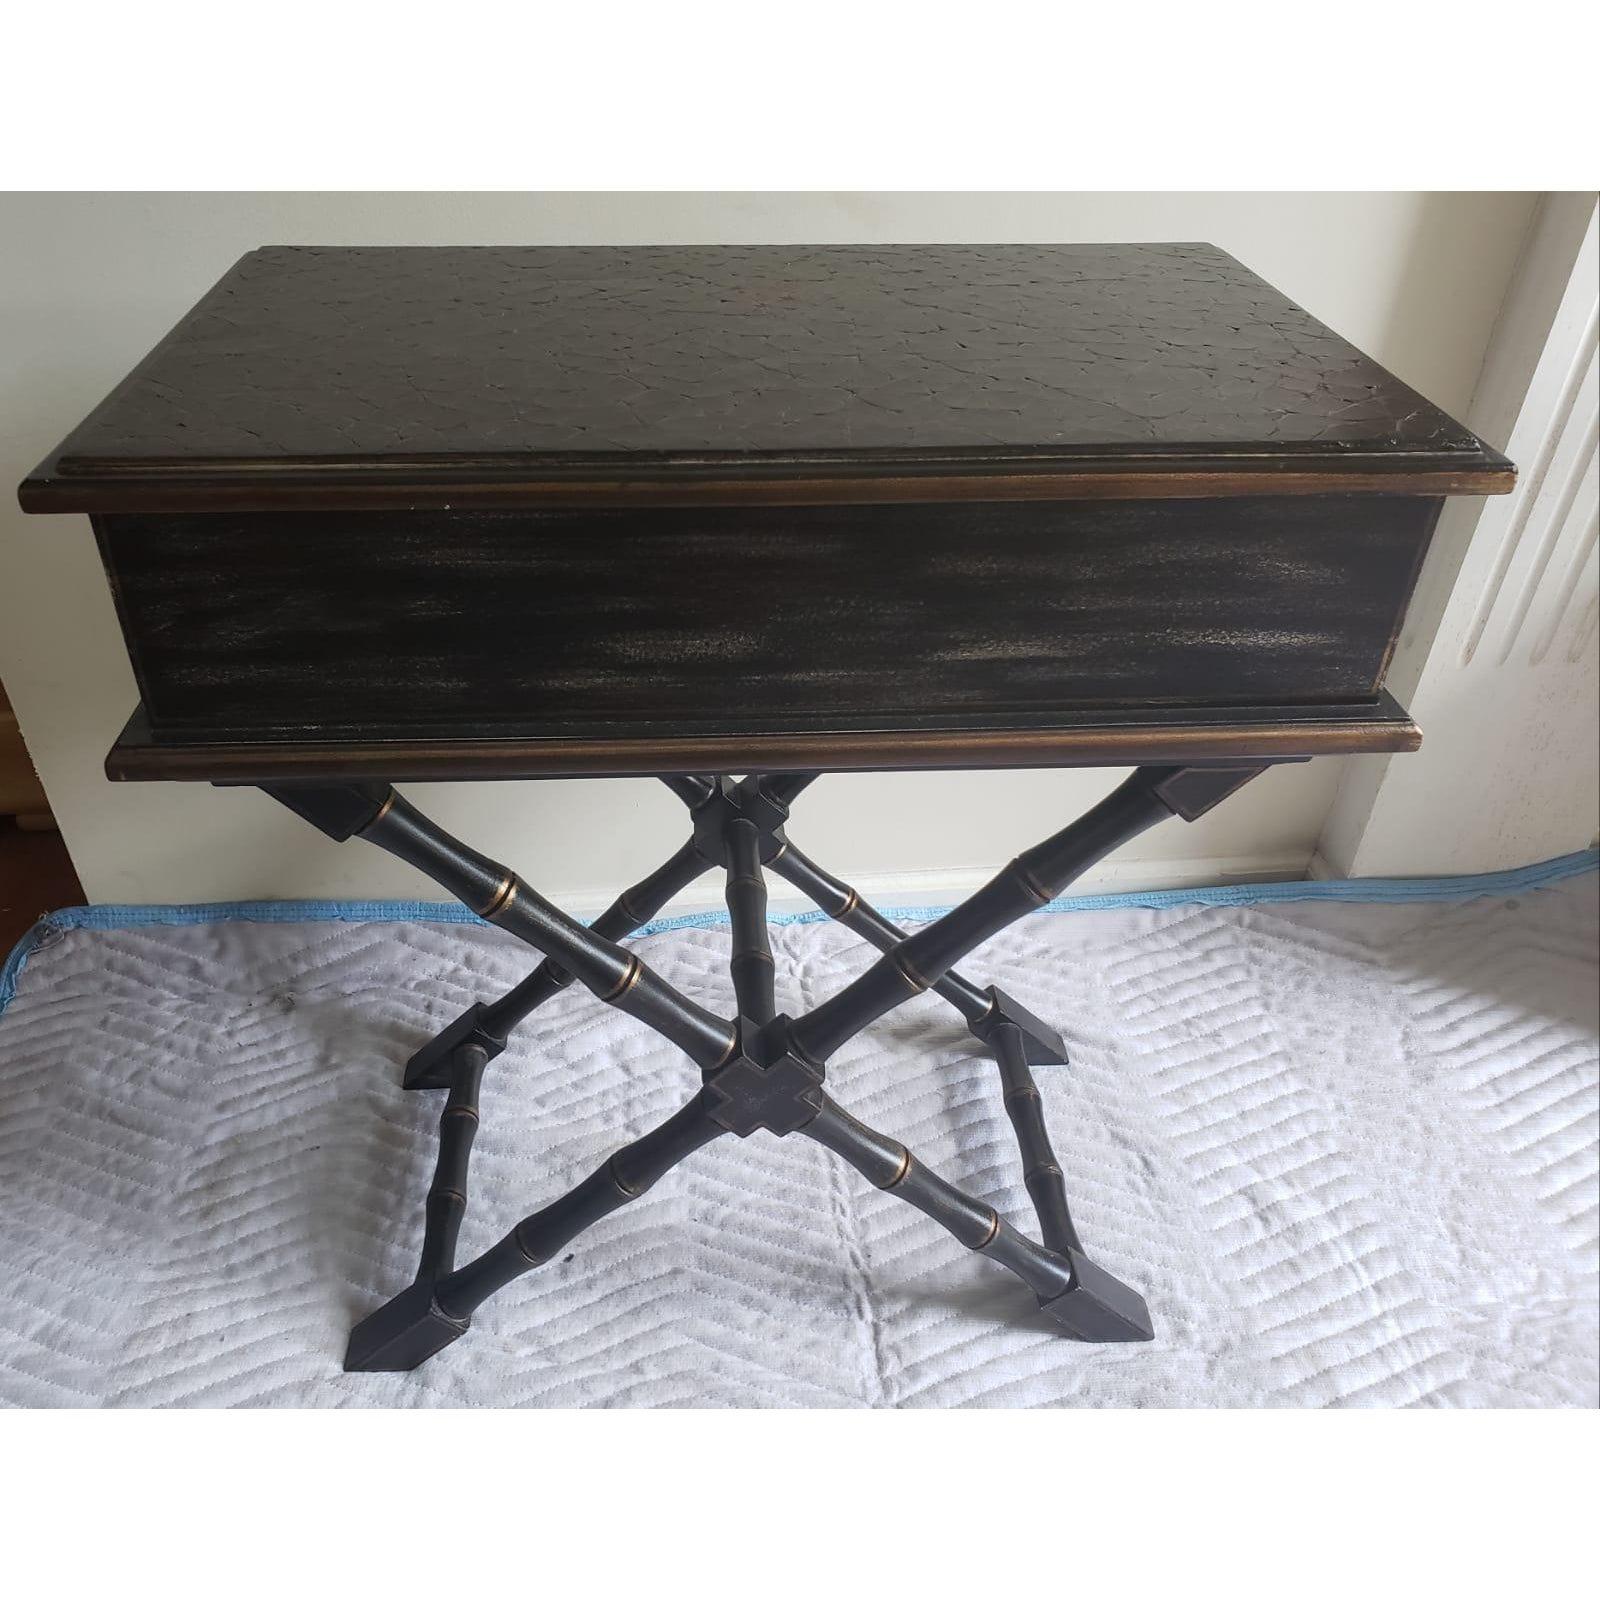 The Bradburn Home Neoclassical StyleTwo-Drawer Faux Bamboo Crossed Leg Table In Good Condition For Sale In Germantown, MD